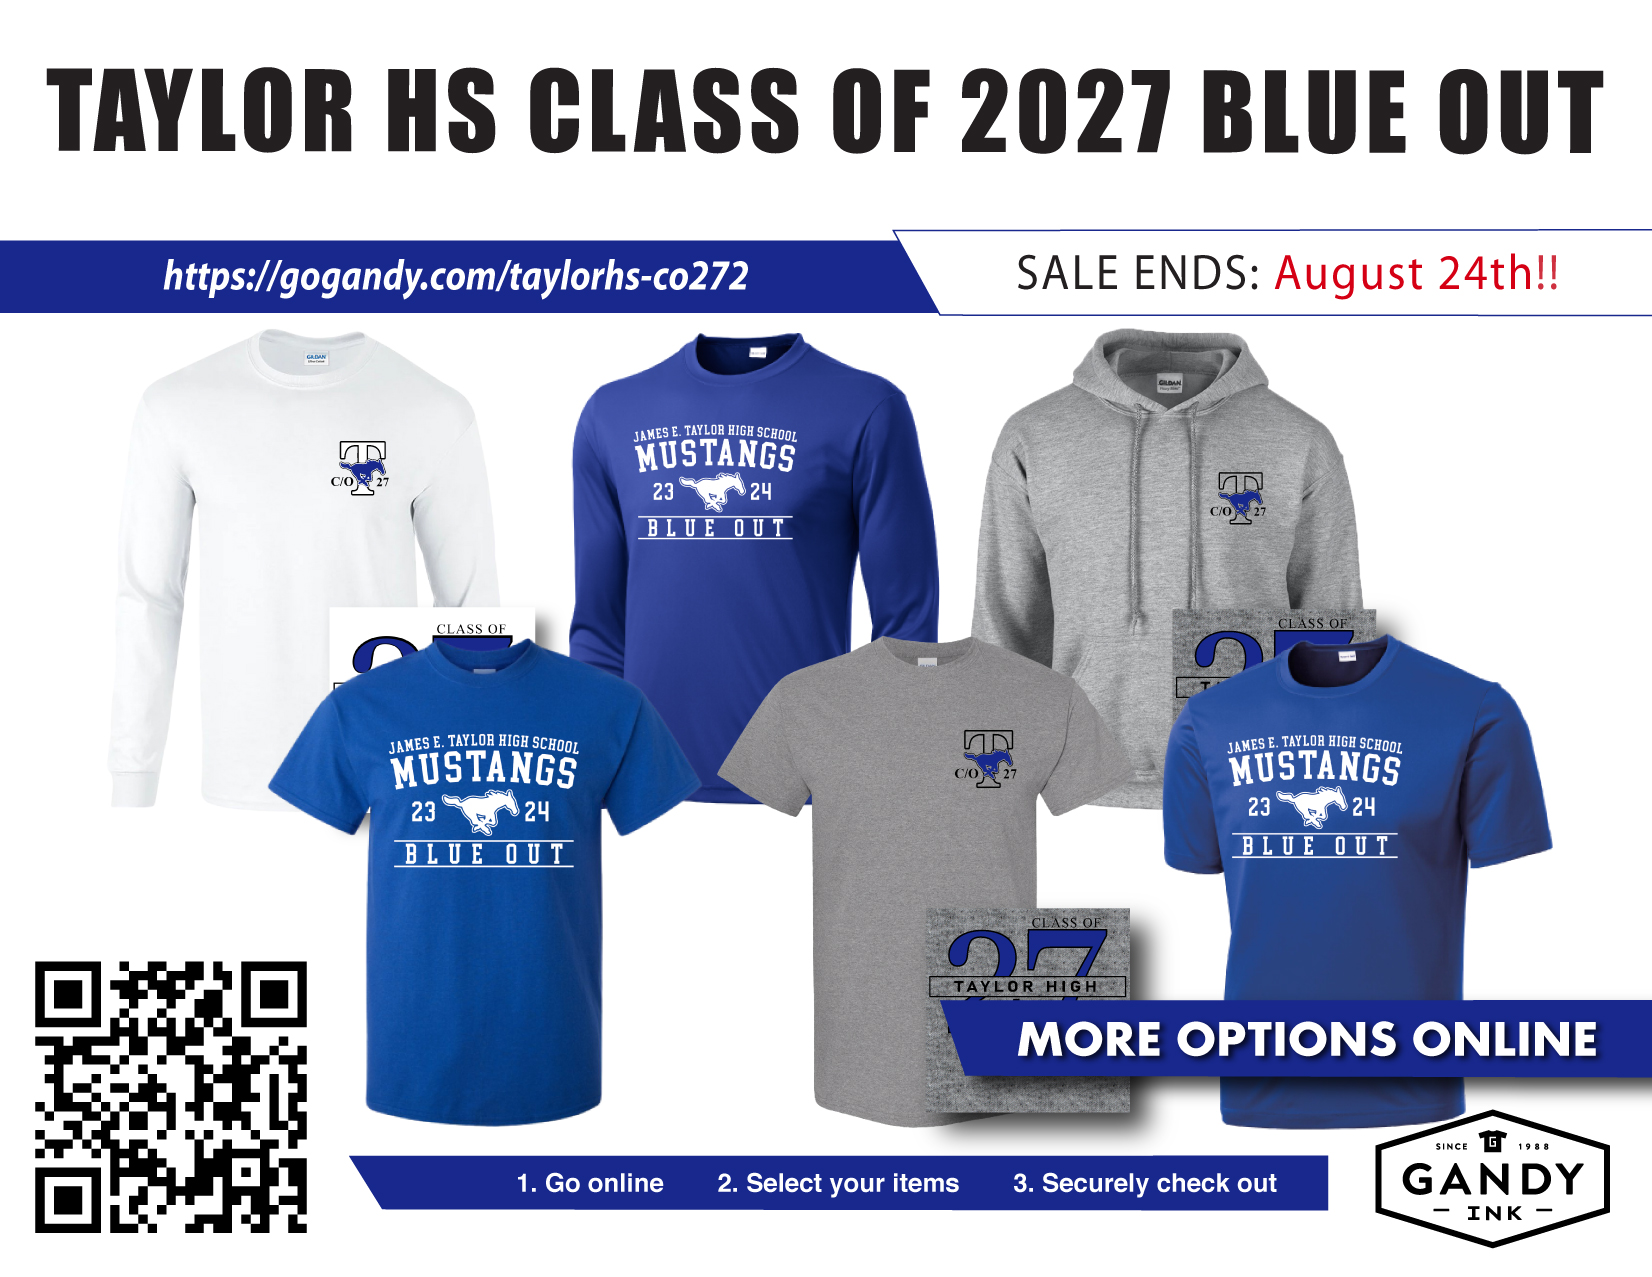 THS Class of 27 Blue Out